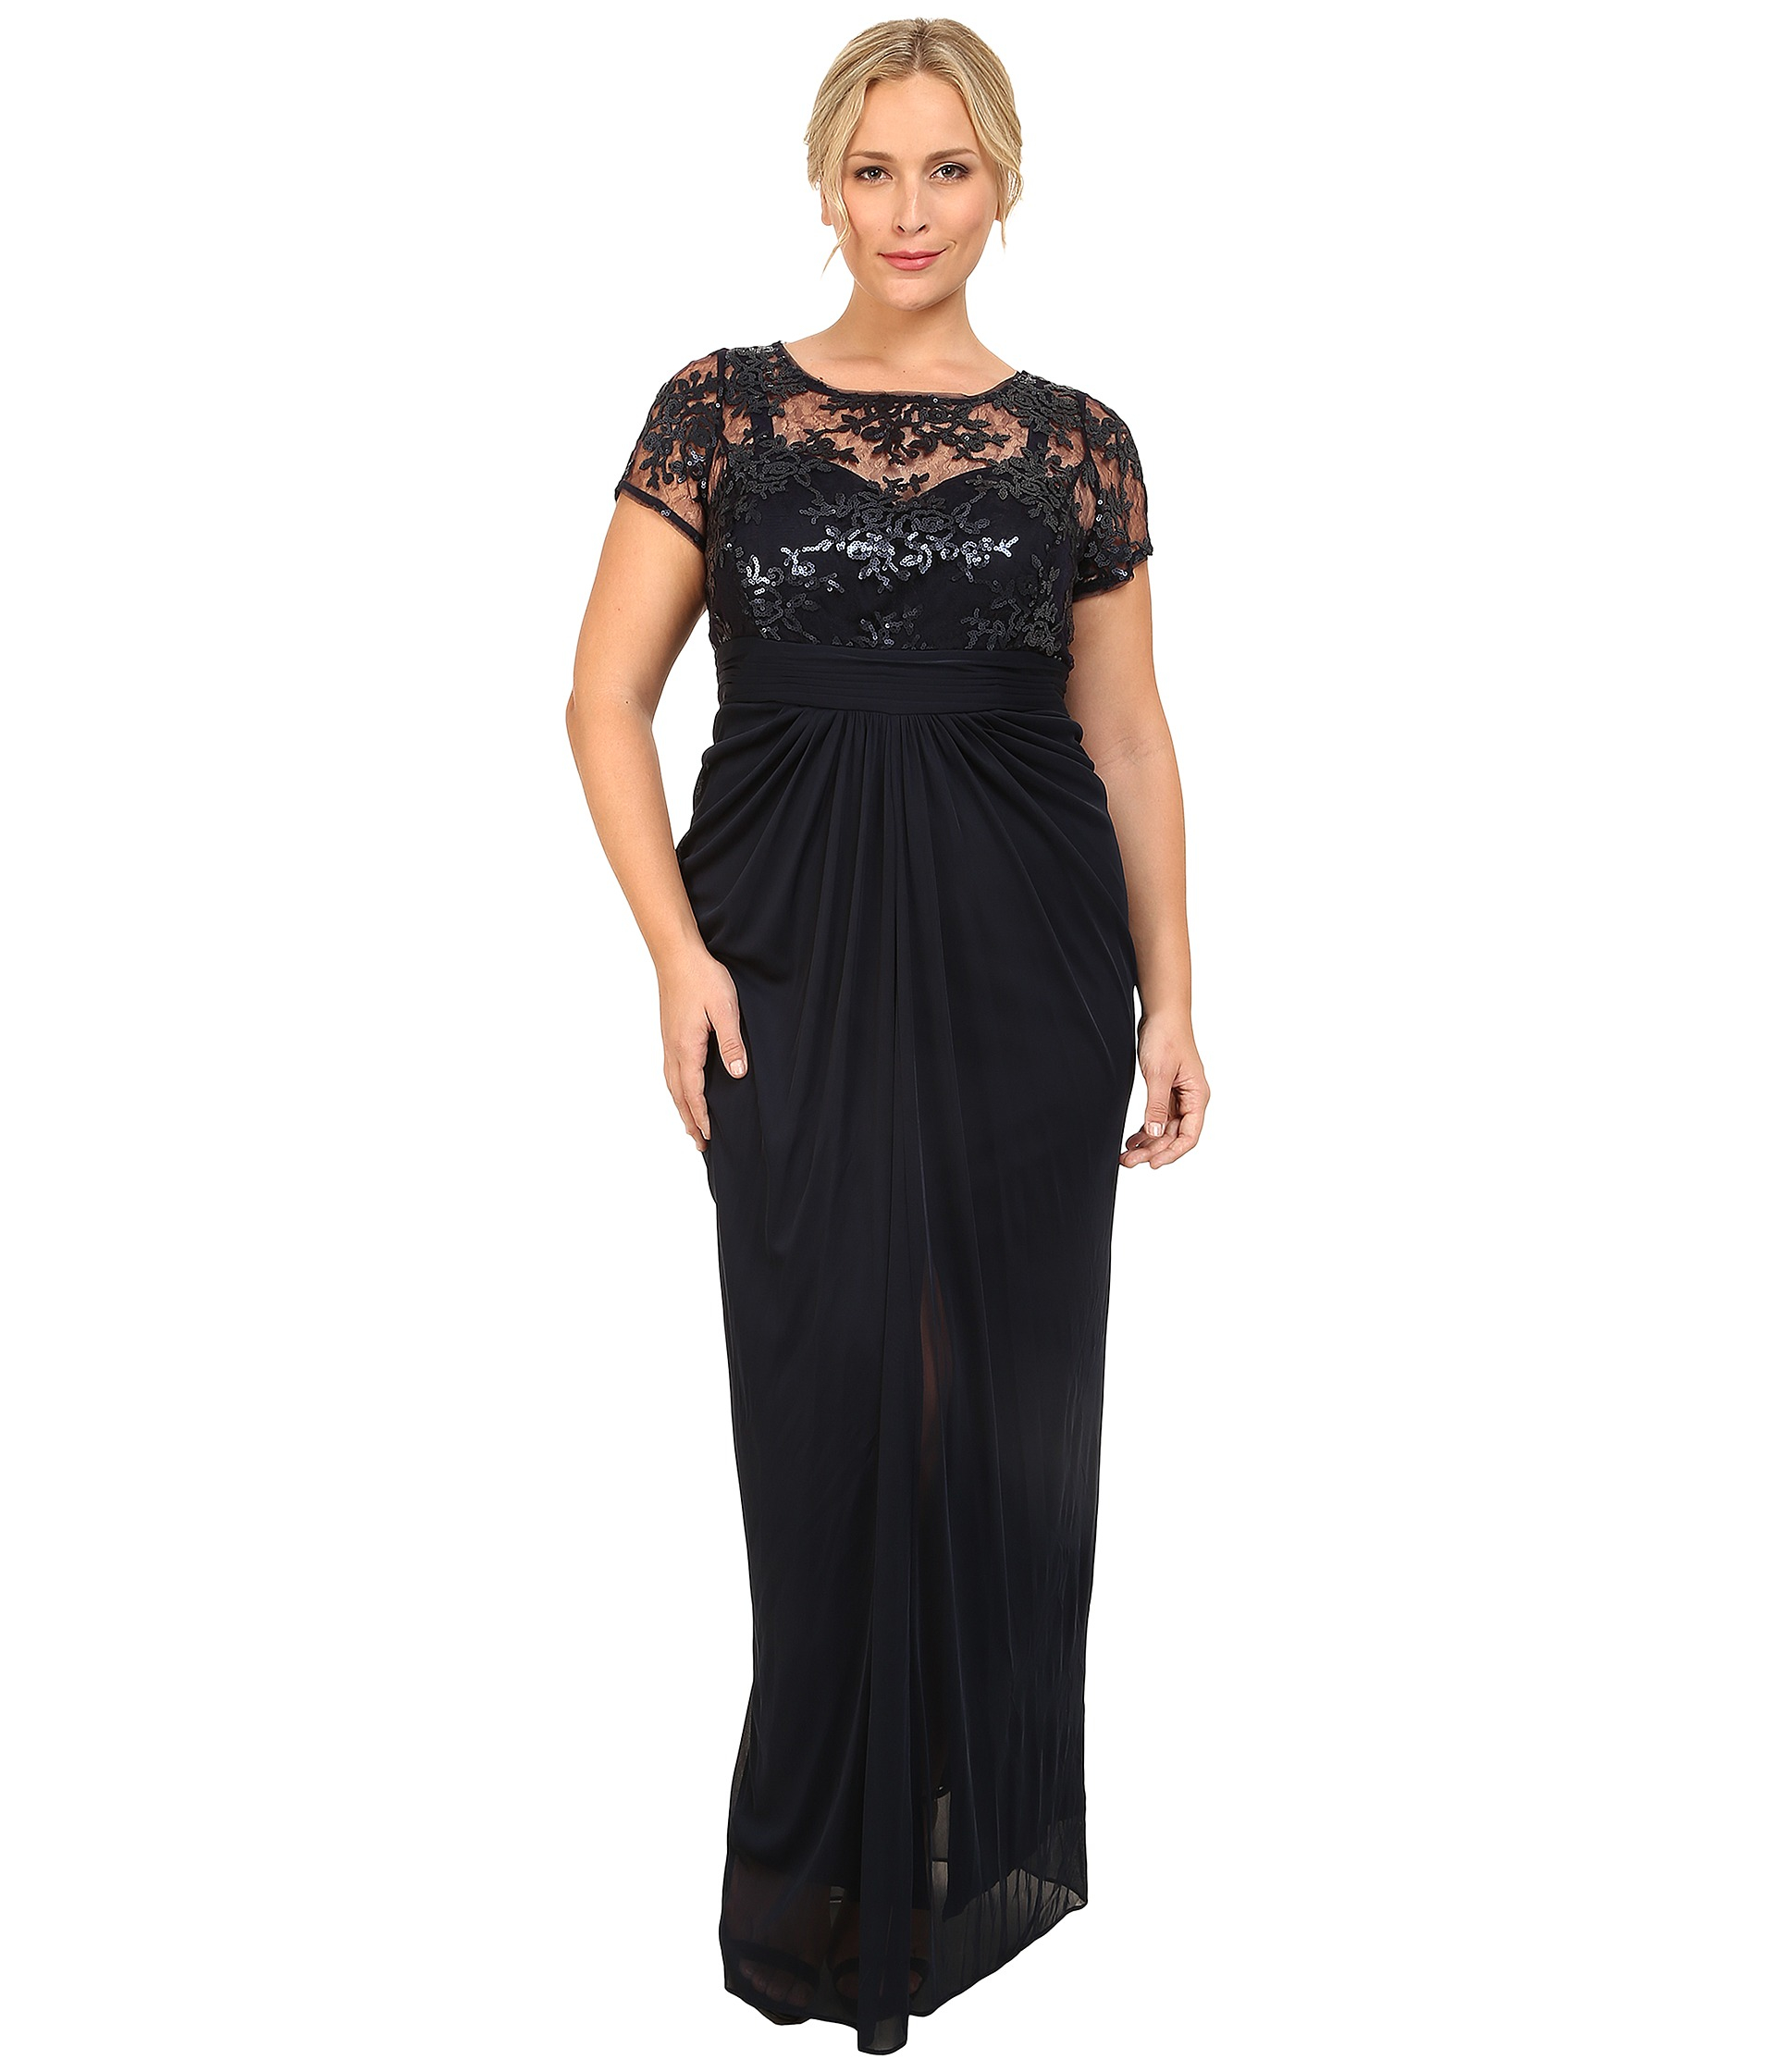 Lyst - Adrianna Papell Plus Size Embroidered Sequined Bodice Gown in Blue